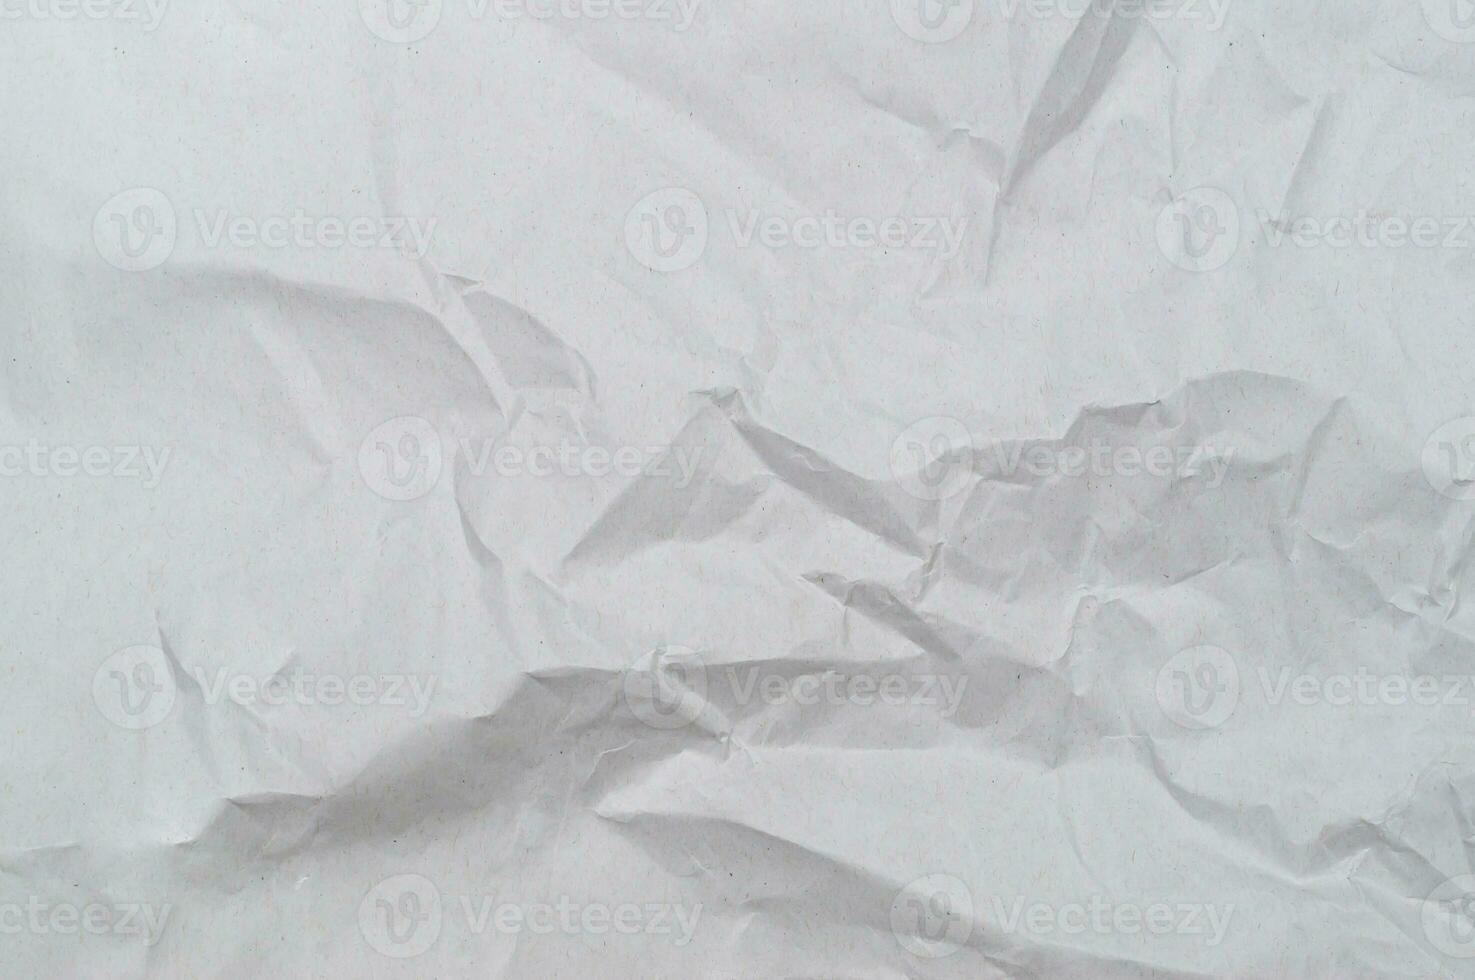 Wrinkled or crumpled white stencil paper or tissue after use in toilet or restroom with large copy space used for background texture in decorative art work photo